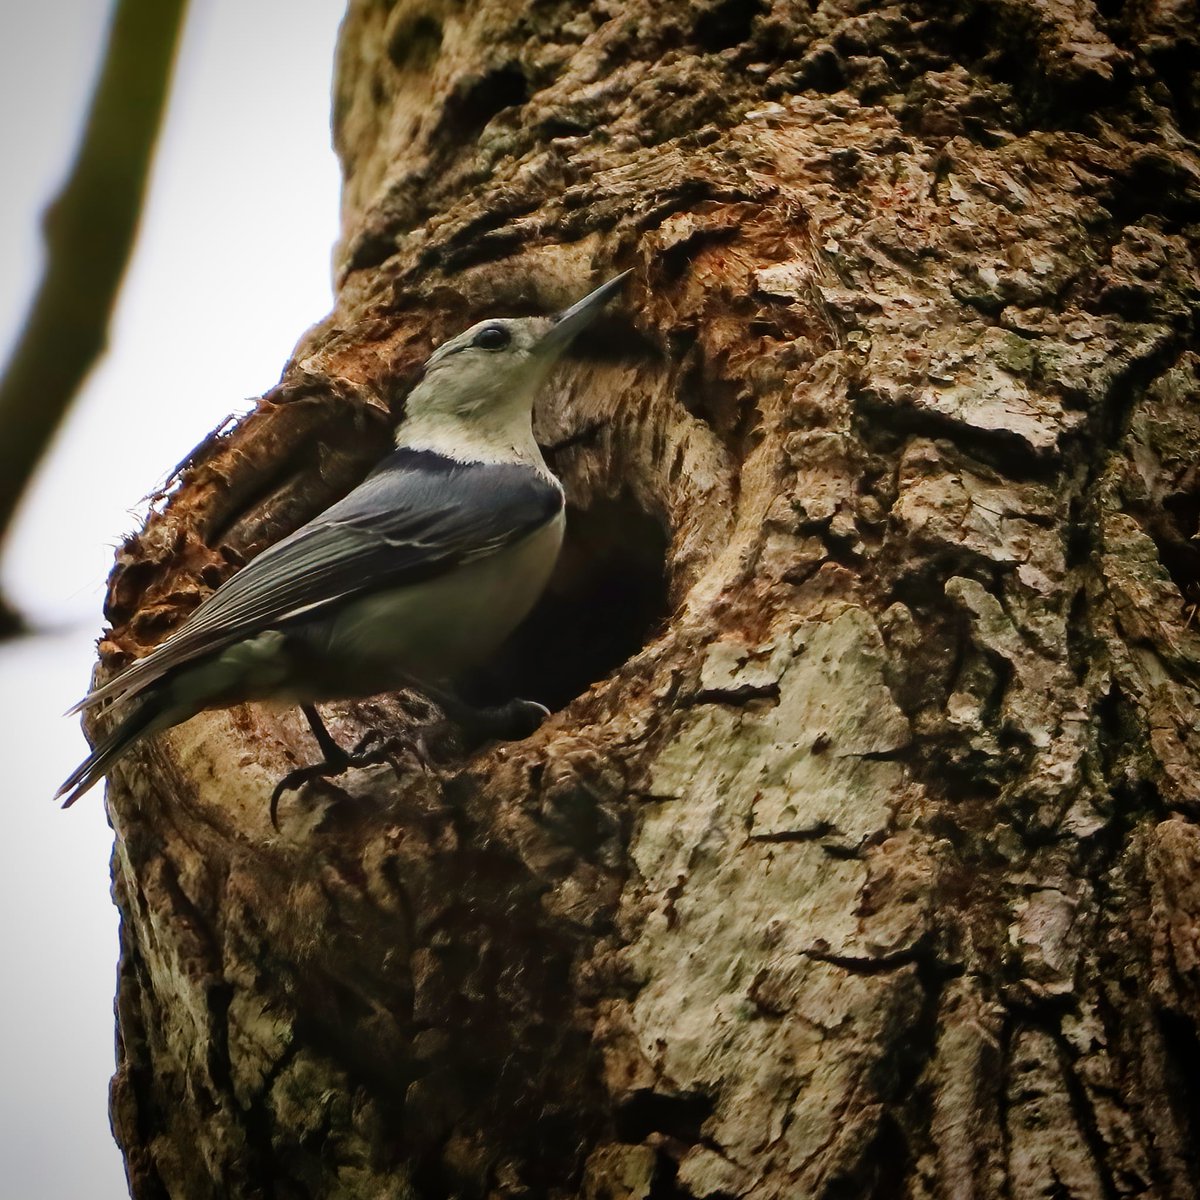 It was so neat to watch this white-breasted nuthatch prepare her nesting cavity!
#whitebreastednuthatches #whitebreastednuthatch #nuthatch #nuthatches #nesting #nestingcavity #nestingcavities #ohiobirdworld #ohiobirdlovers #birdlovers #birdwatching #birdwatchers #birdlife